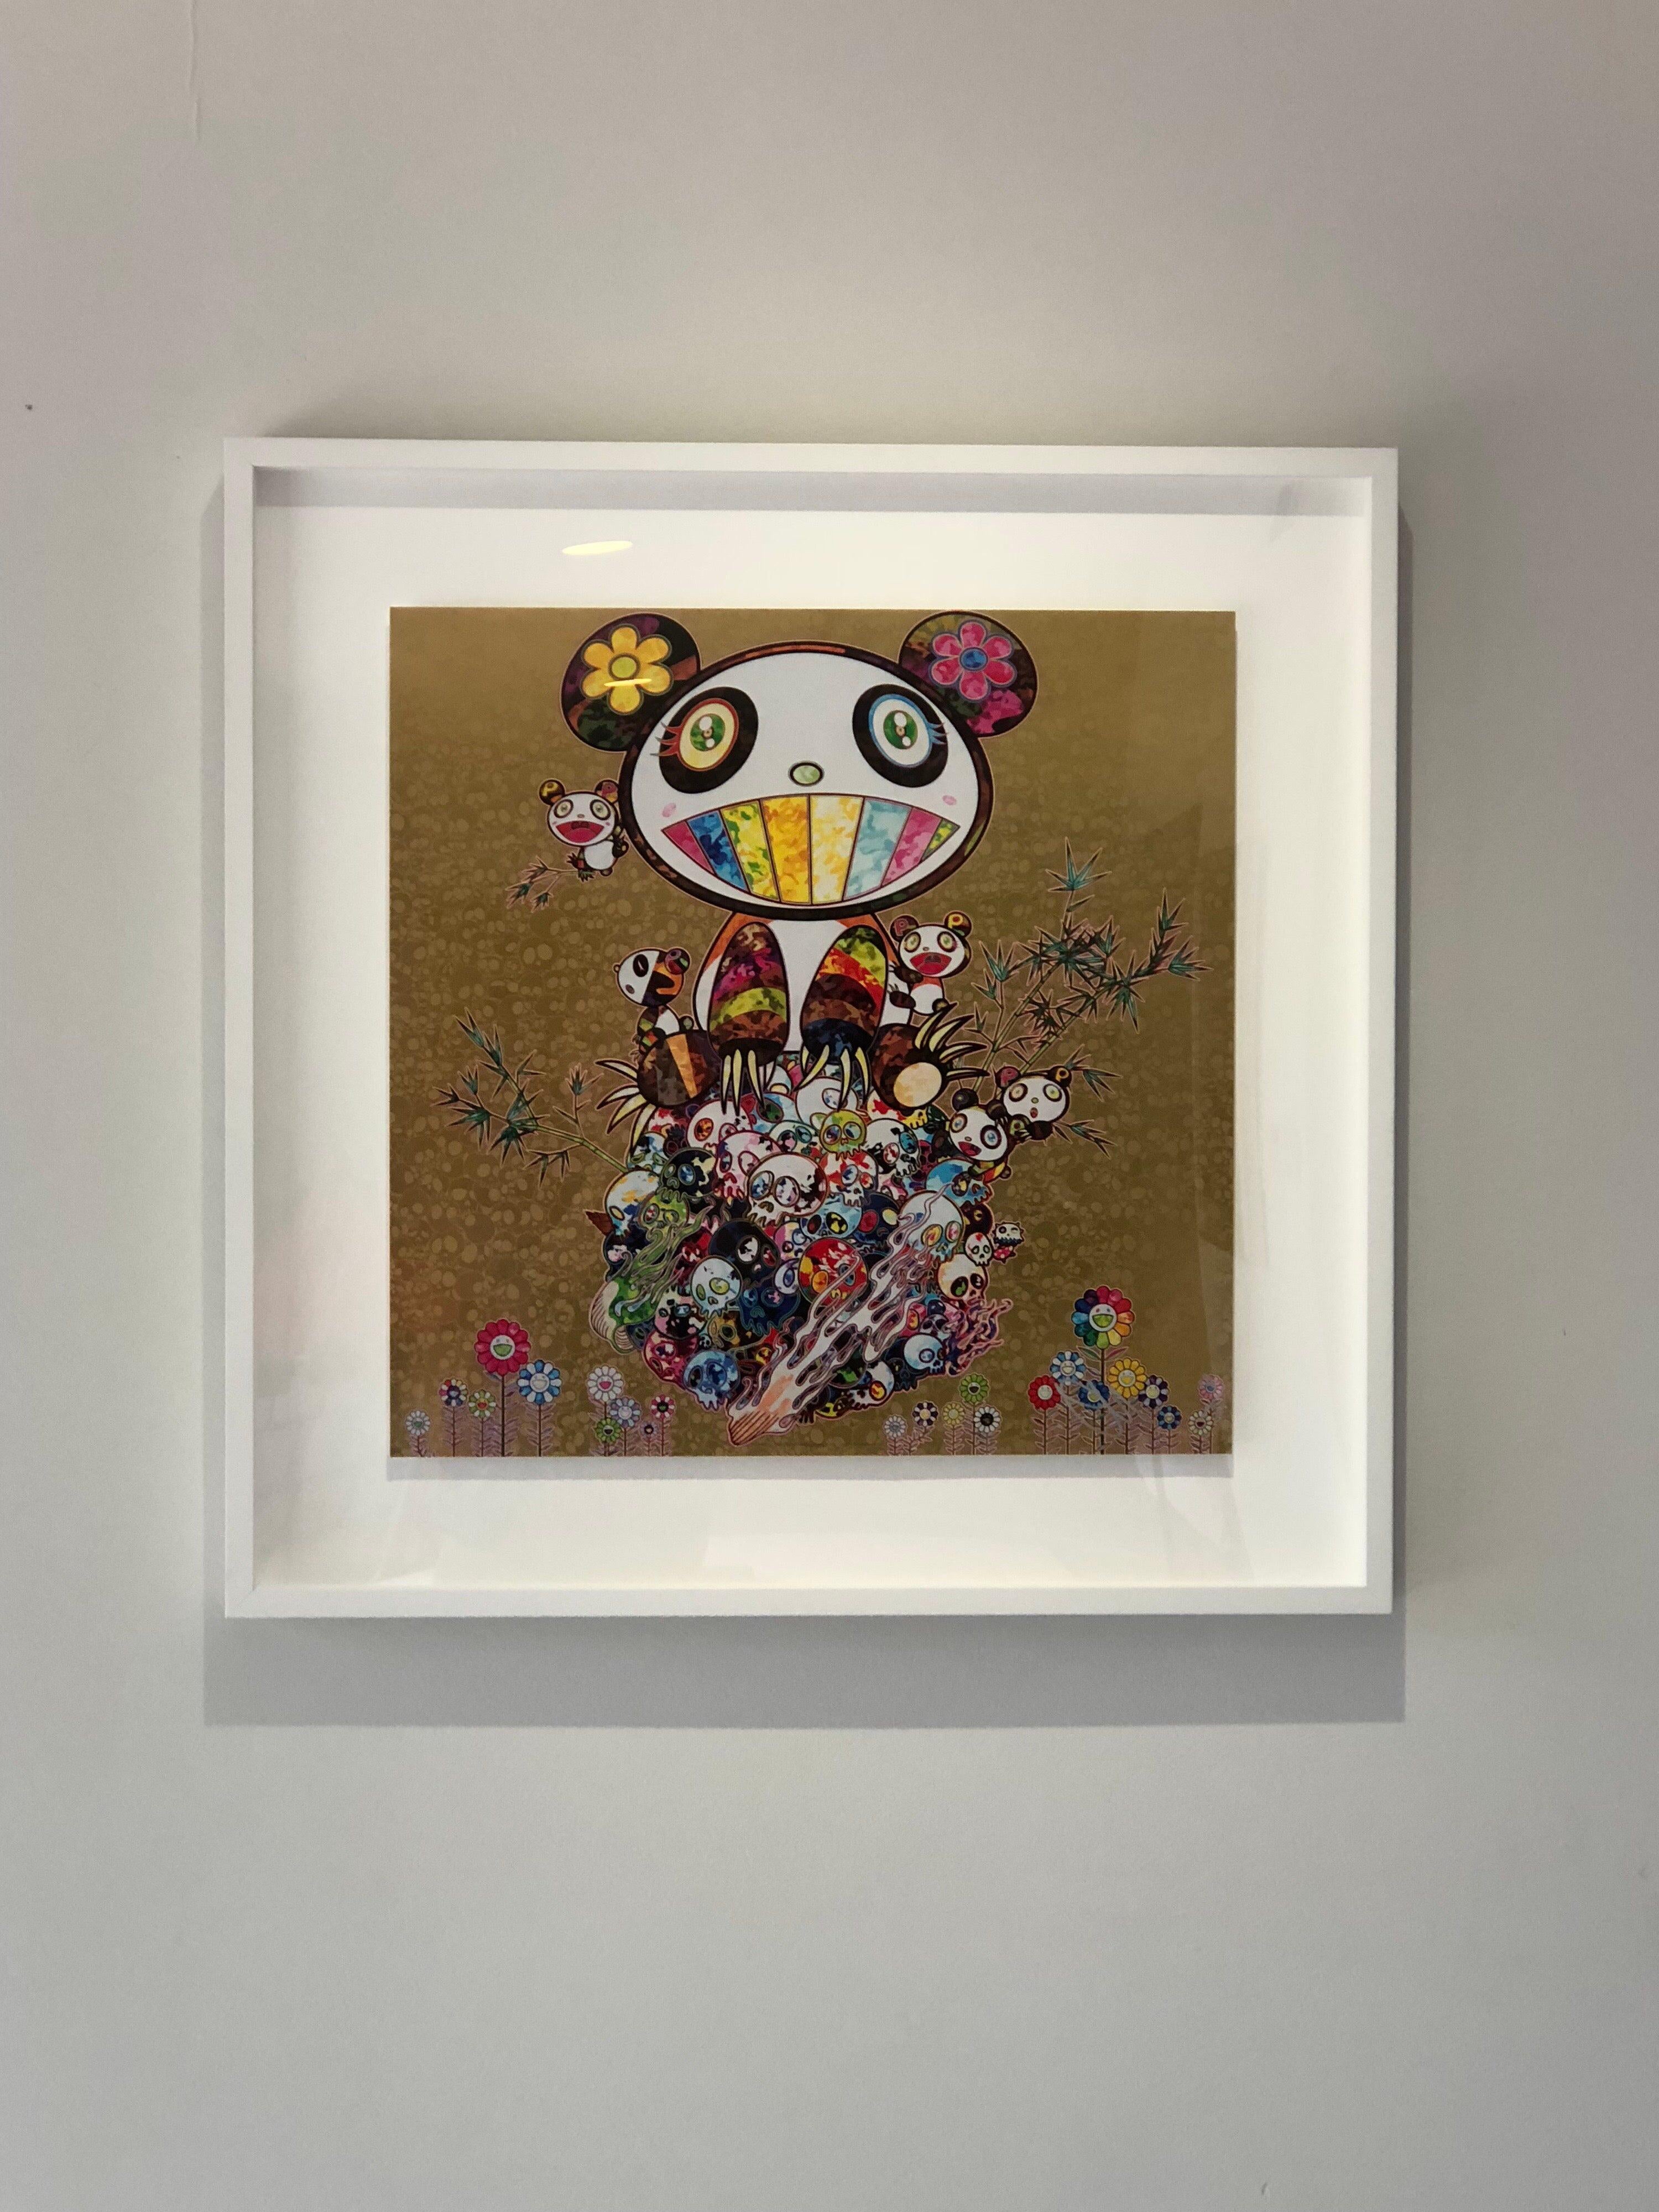 This is an original Murakami print. Sold unframed. Brand new. Handsigned and numbered out of 300 editions. Buyer protection by both 1stdibs and gallery. 
Last one from our inventory.

Photo of gold panda illustrate an example of a framed